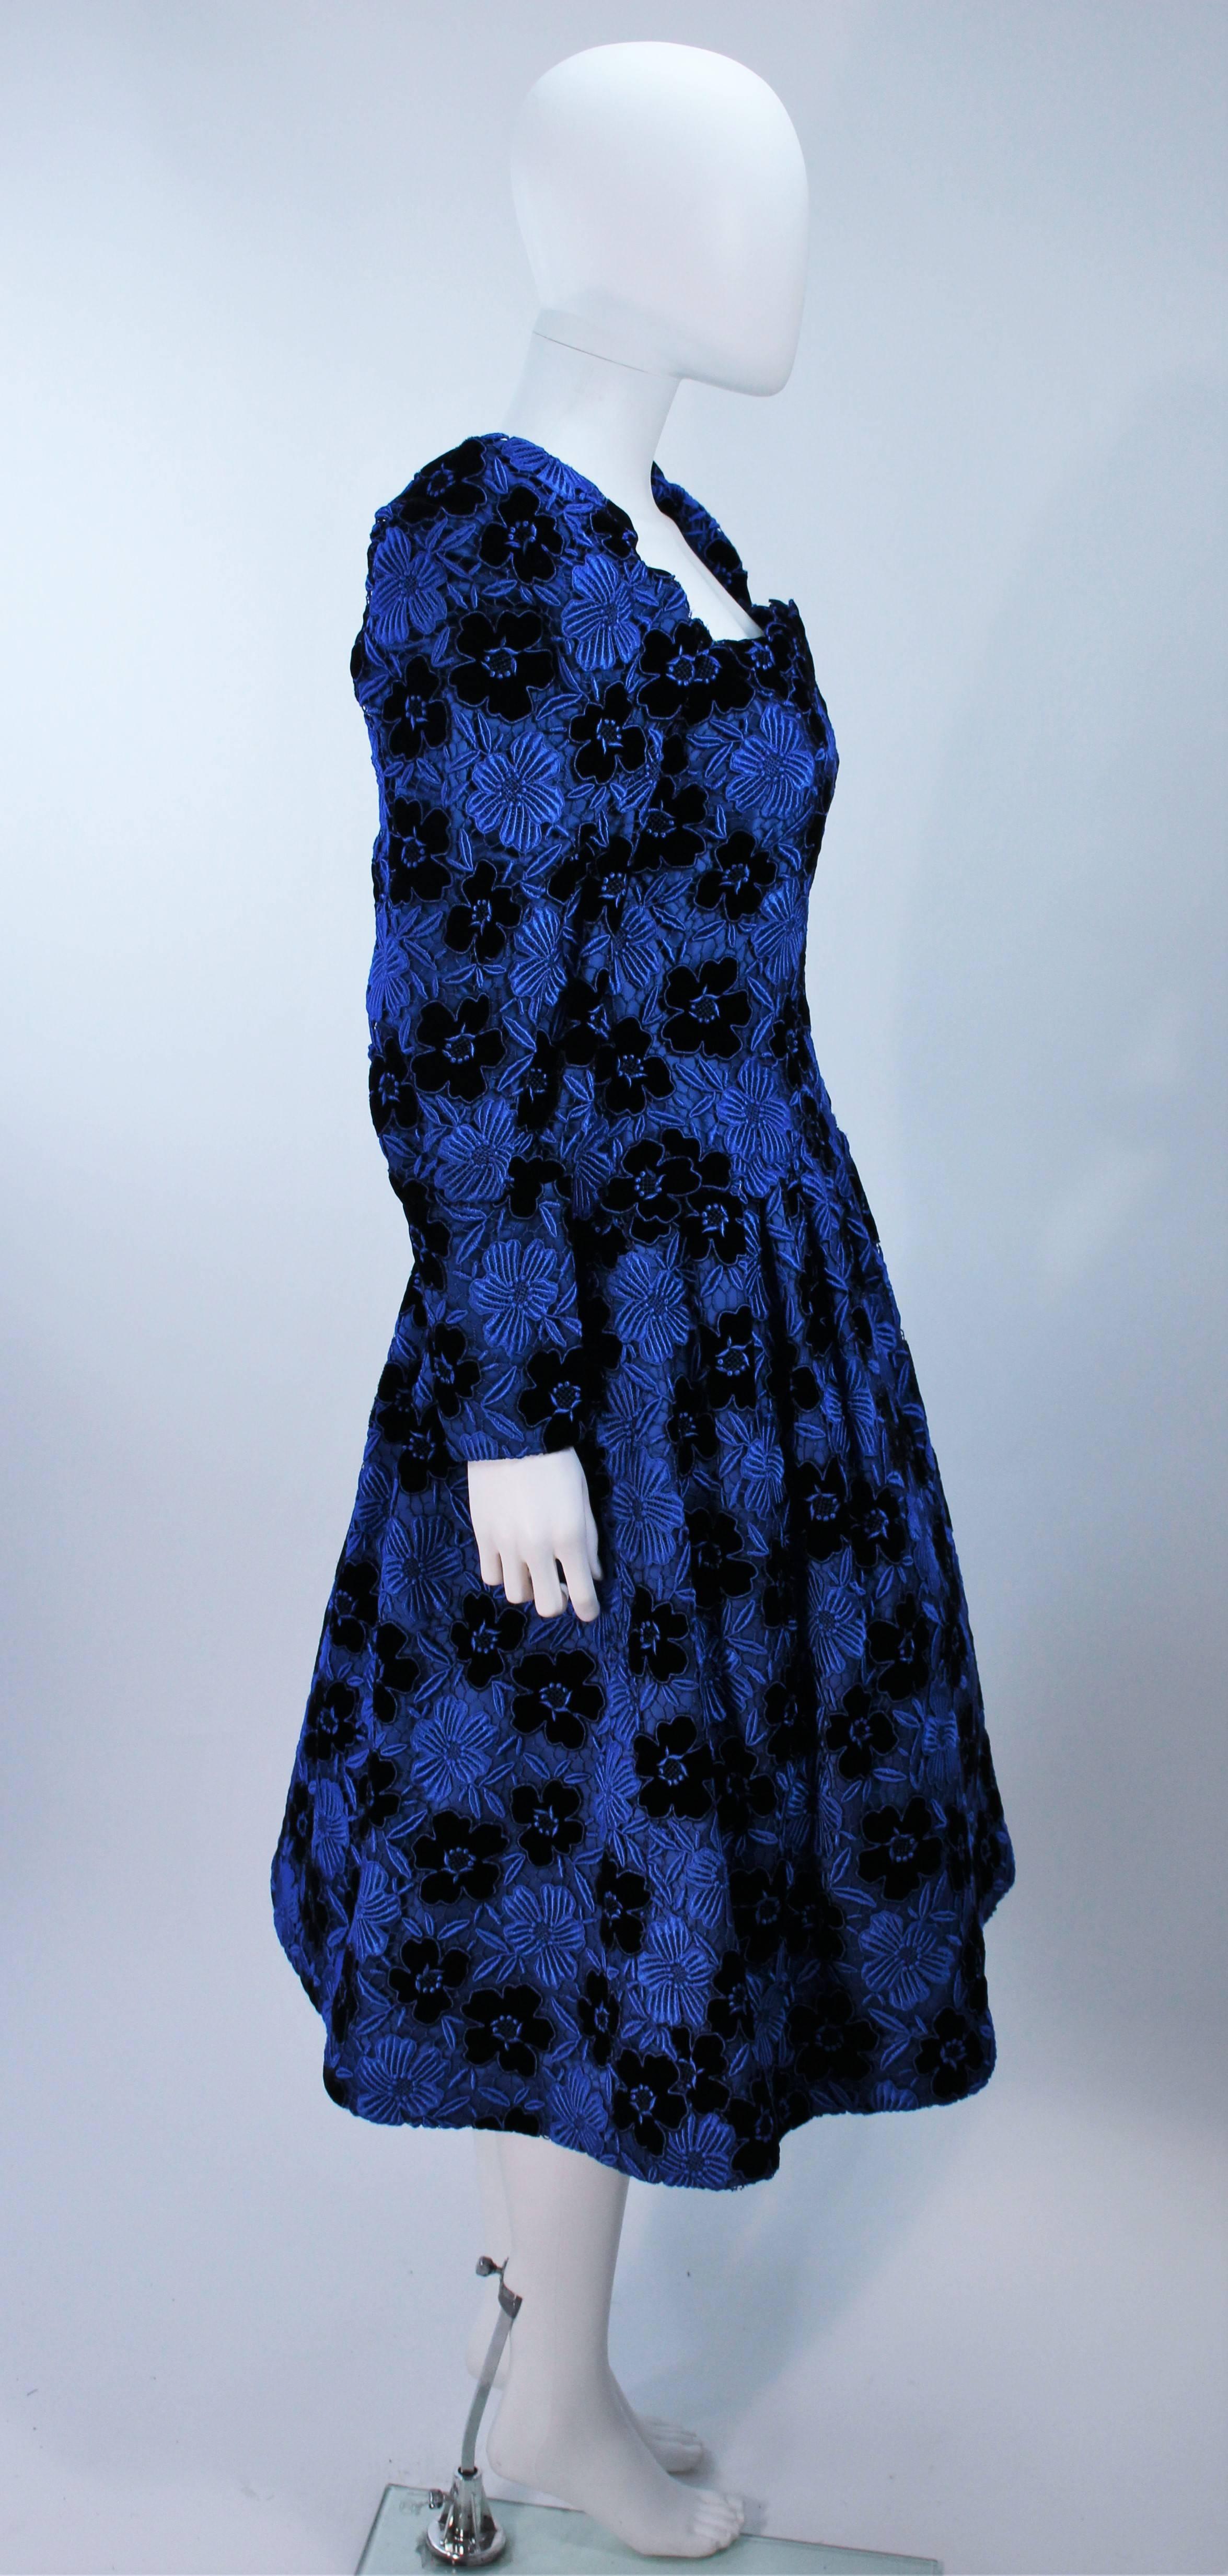 ARNOLD SCAASI Cobalt Blue Evening Dress with Floral Pattern Size 10-12 2